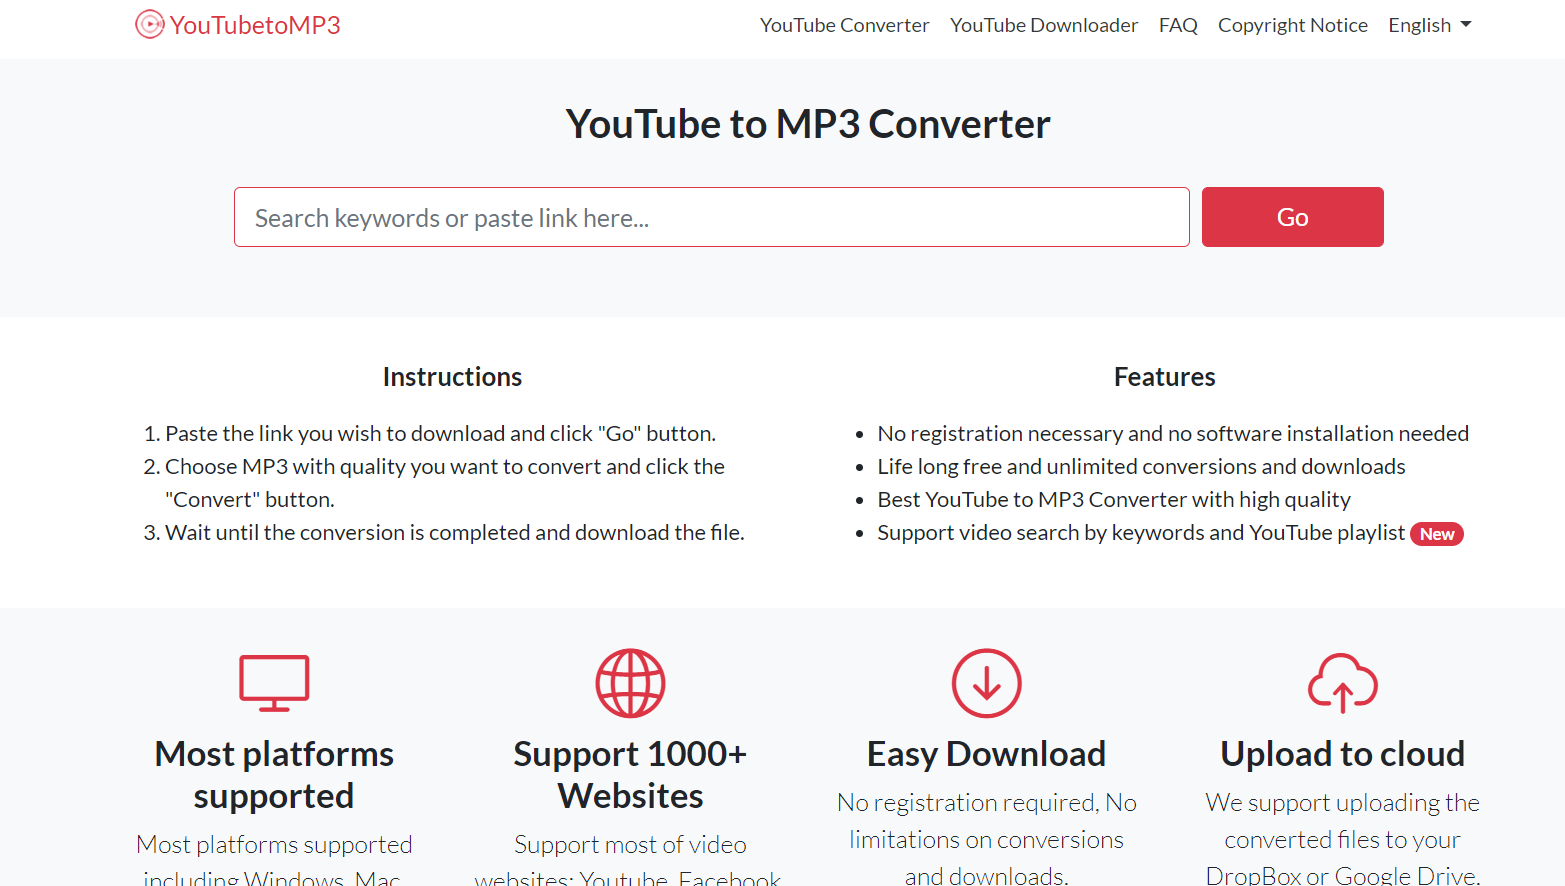 YouTube to MP3 Converter Online: How to Download Music from YouTube on Android Mobile, iPhone, Laptop